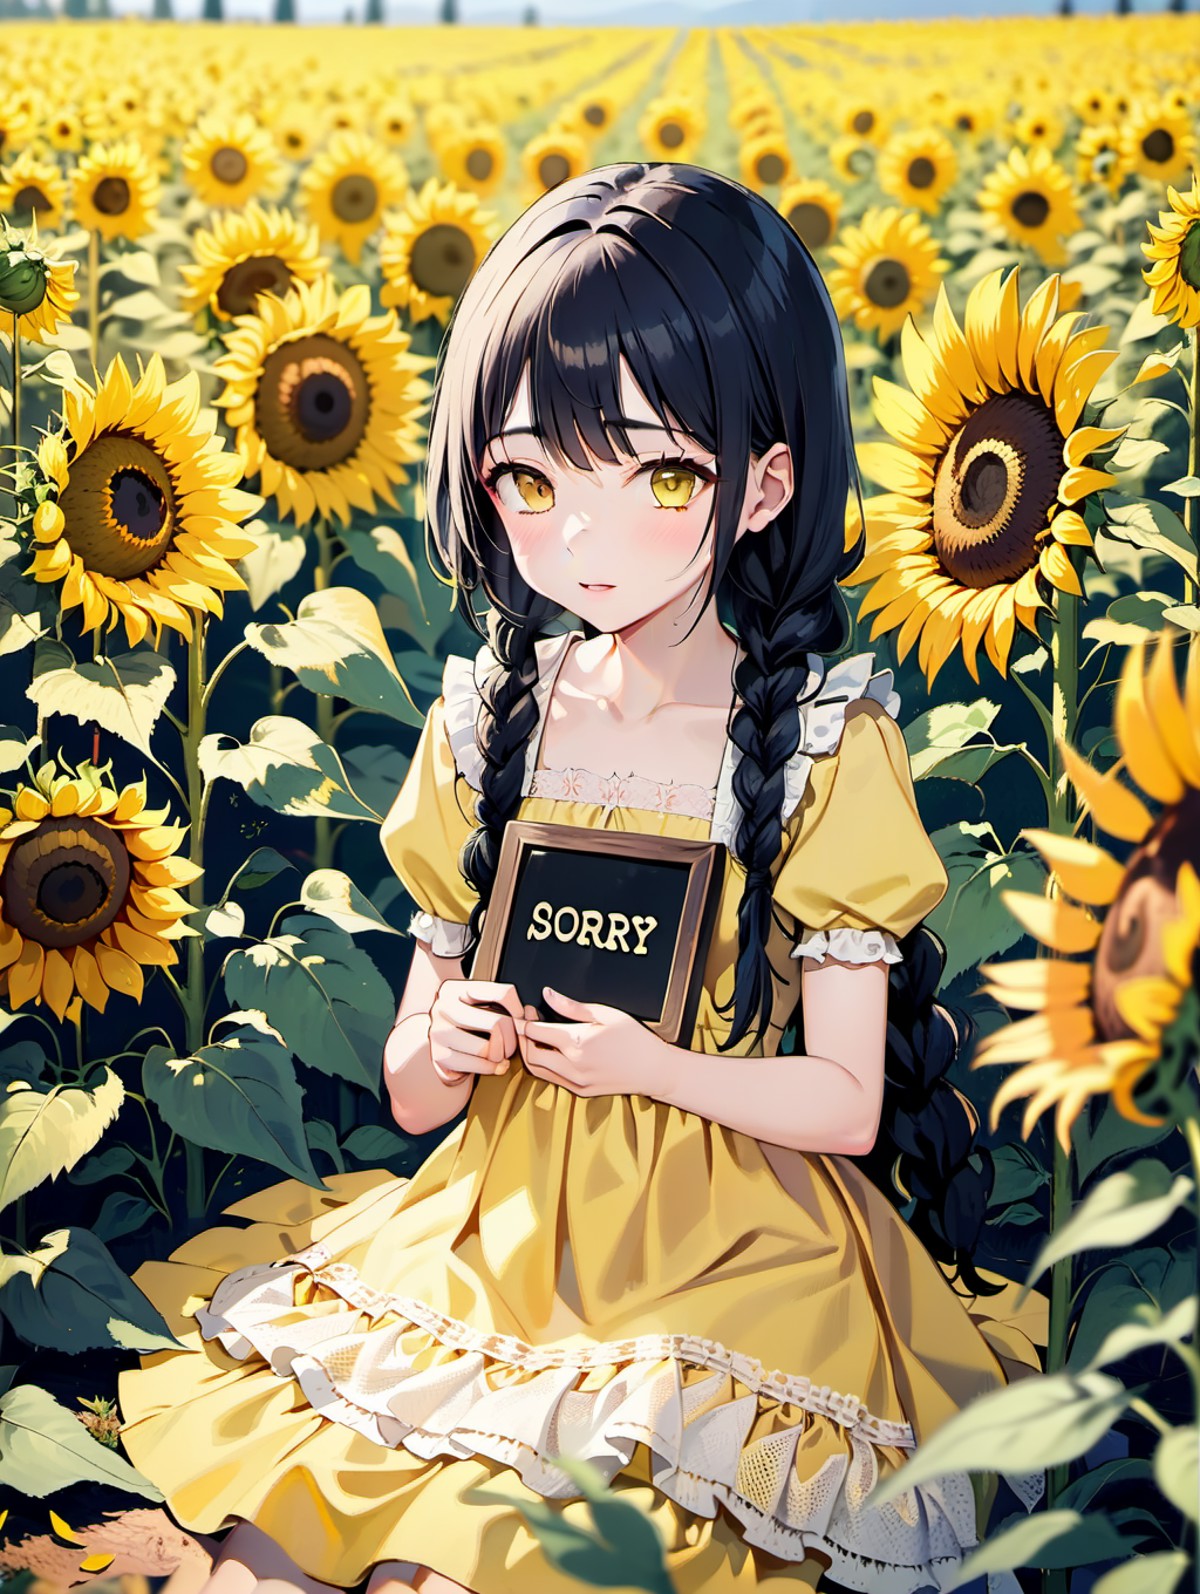 A young girl with long black hair in braids sitting pensively in a sunny flower field of yellow sunflowers. She is wearing...